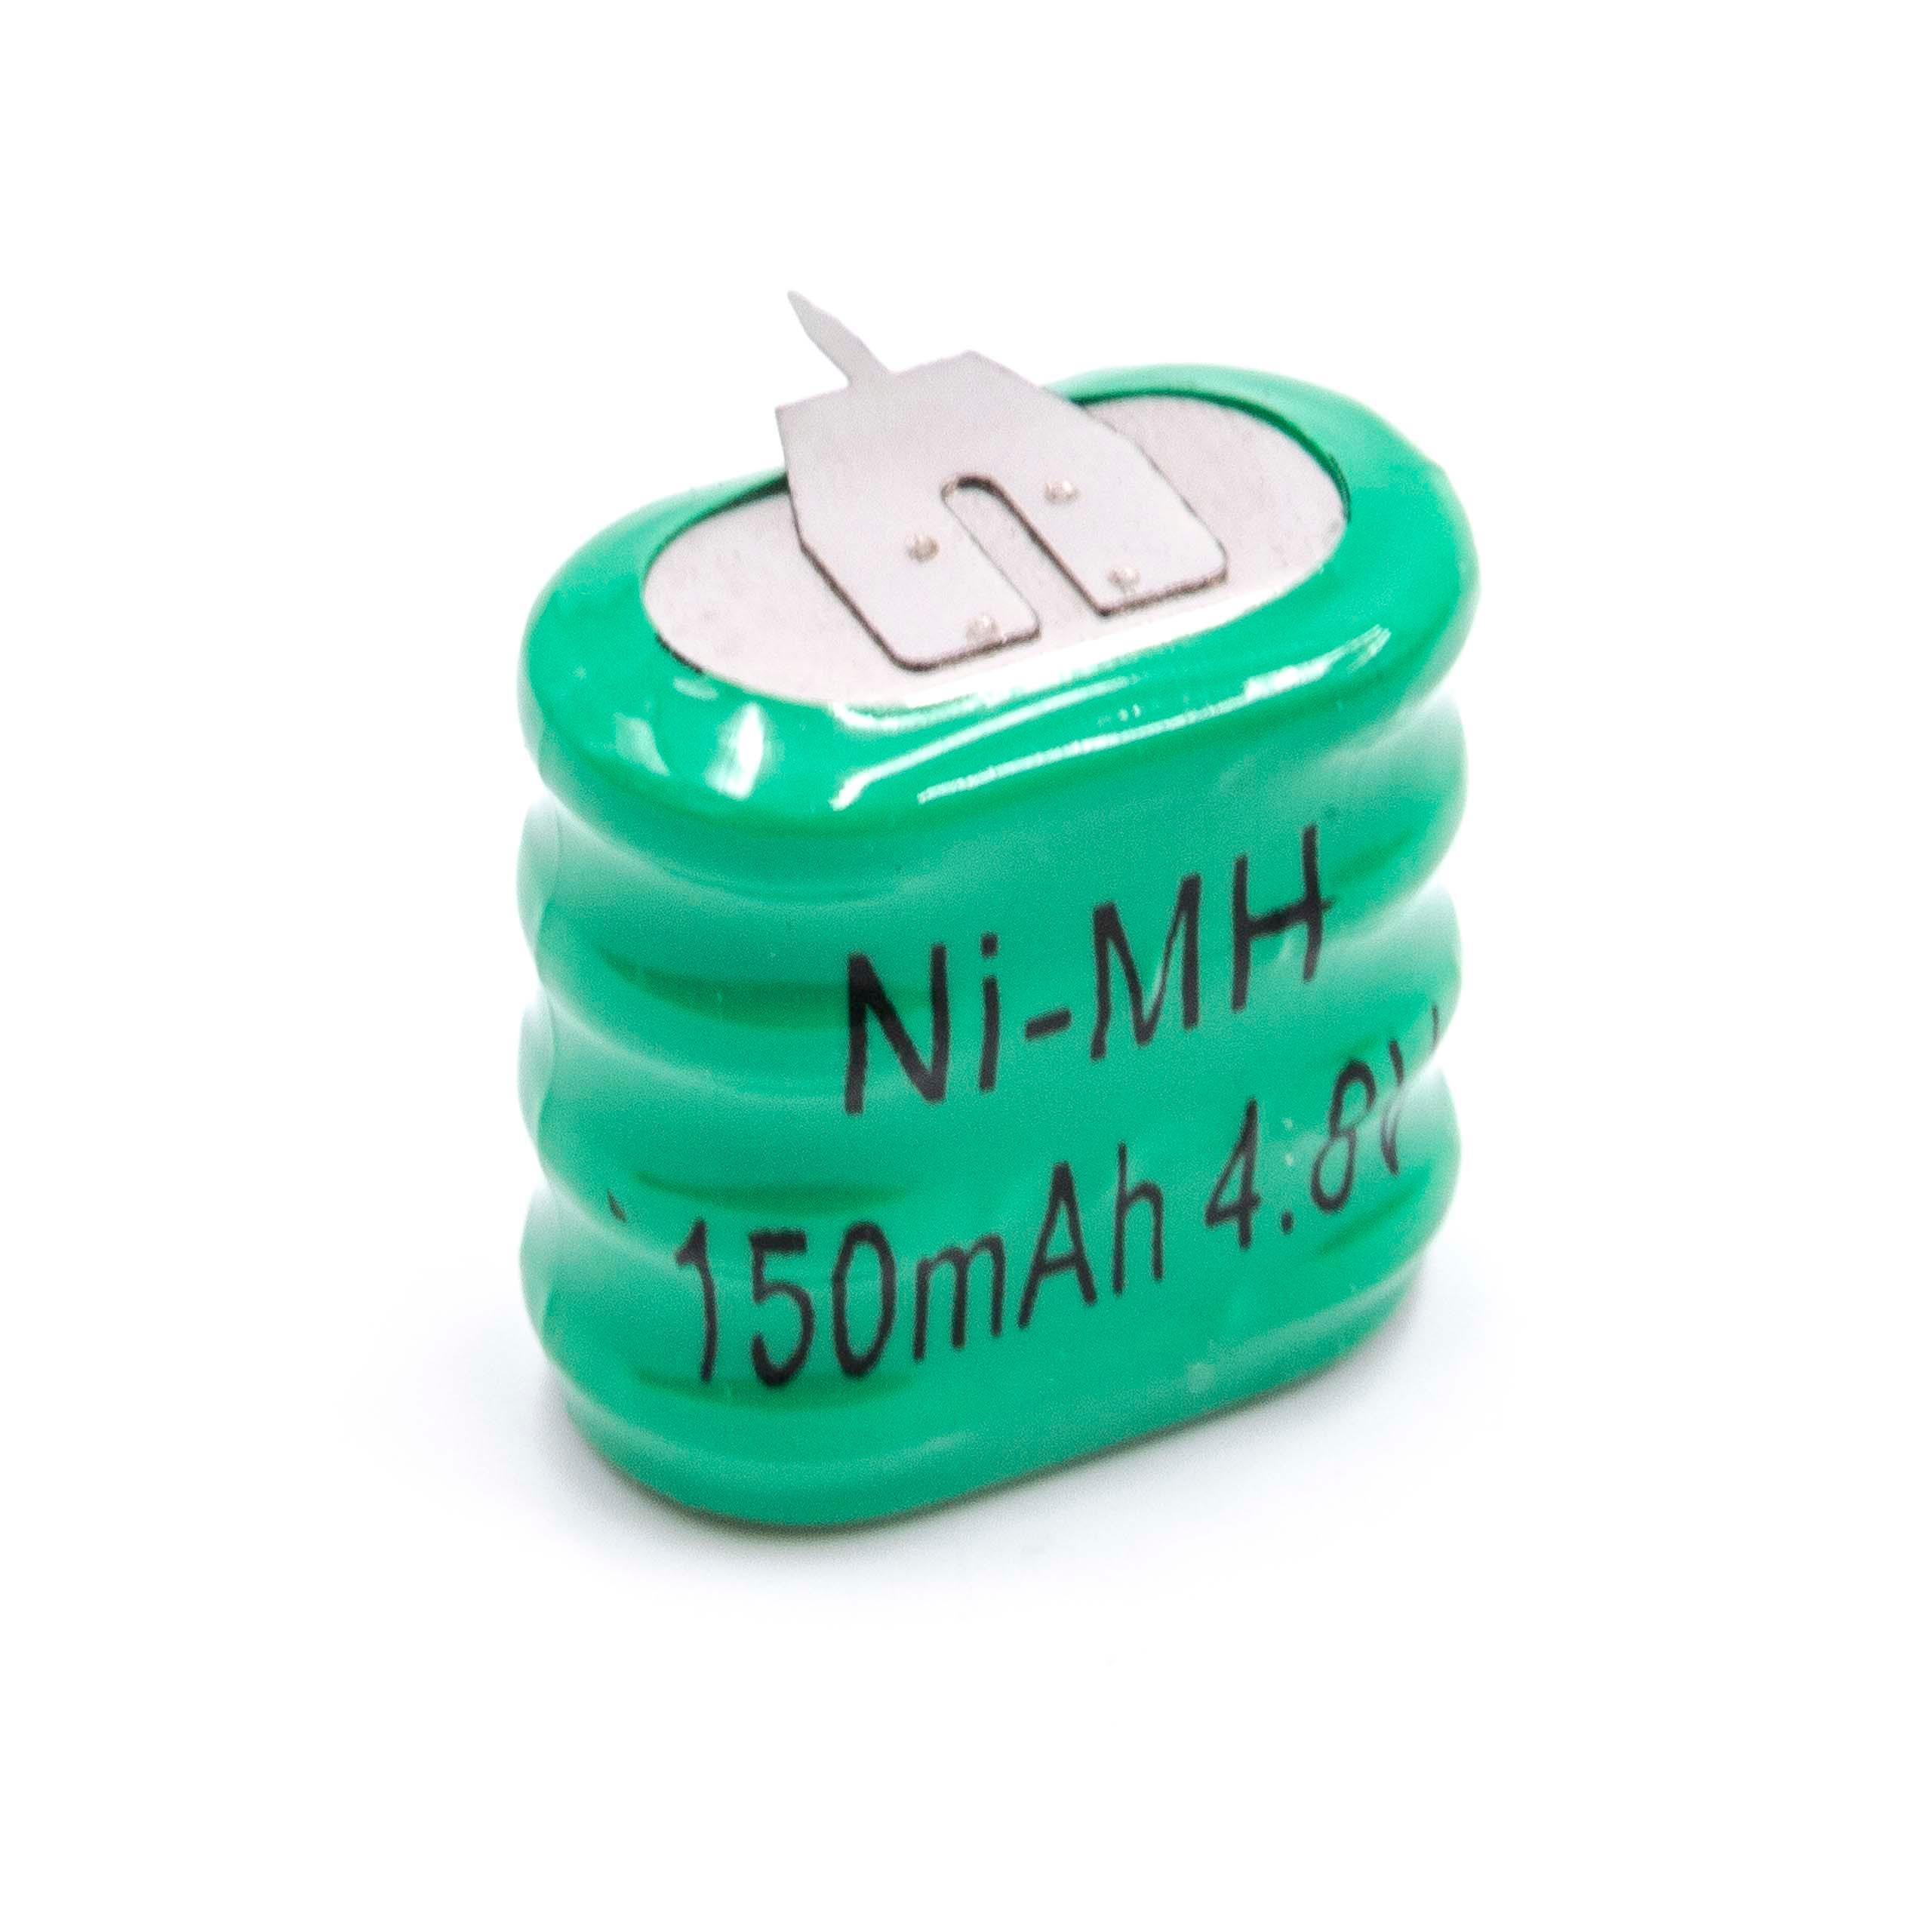 Button Cell Battery (4x Cell) Type 4/V150H 3 Pins for Model Building Solar Lamps etc. - 150mAh 4.8V NiMH